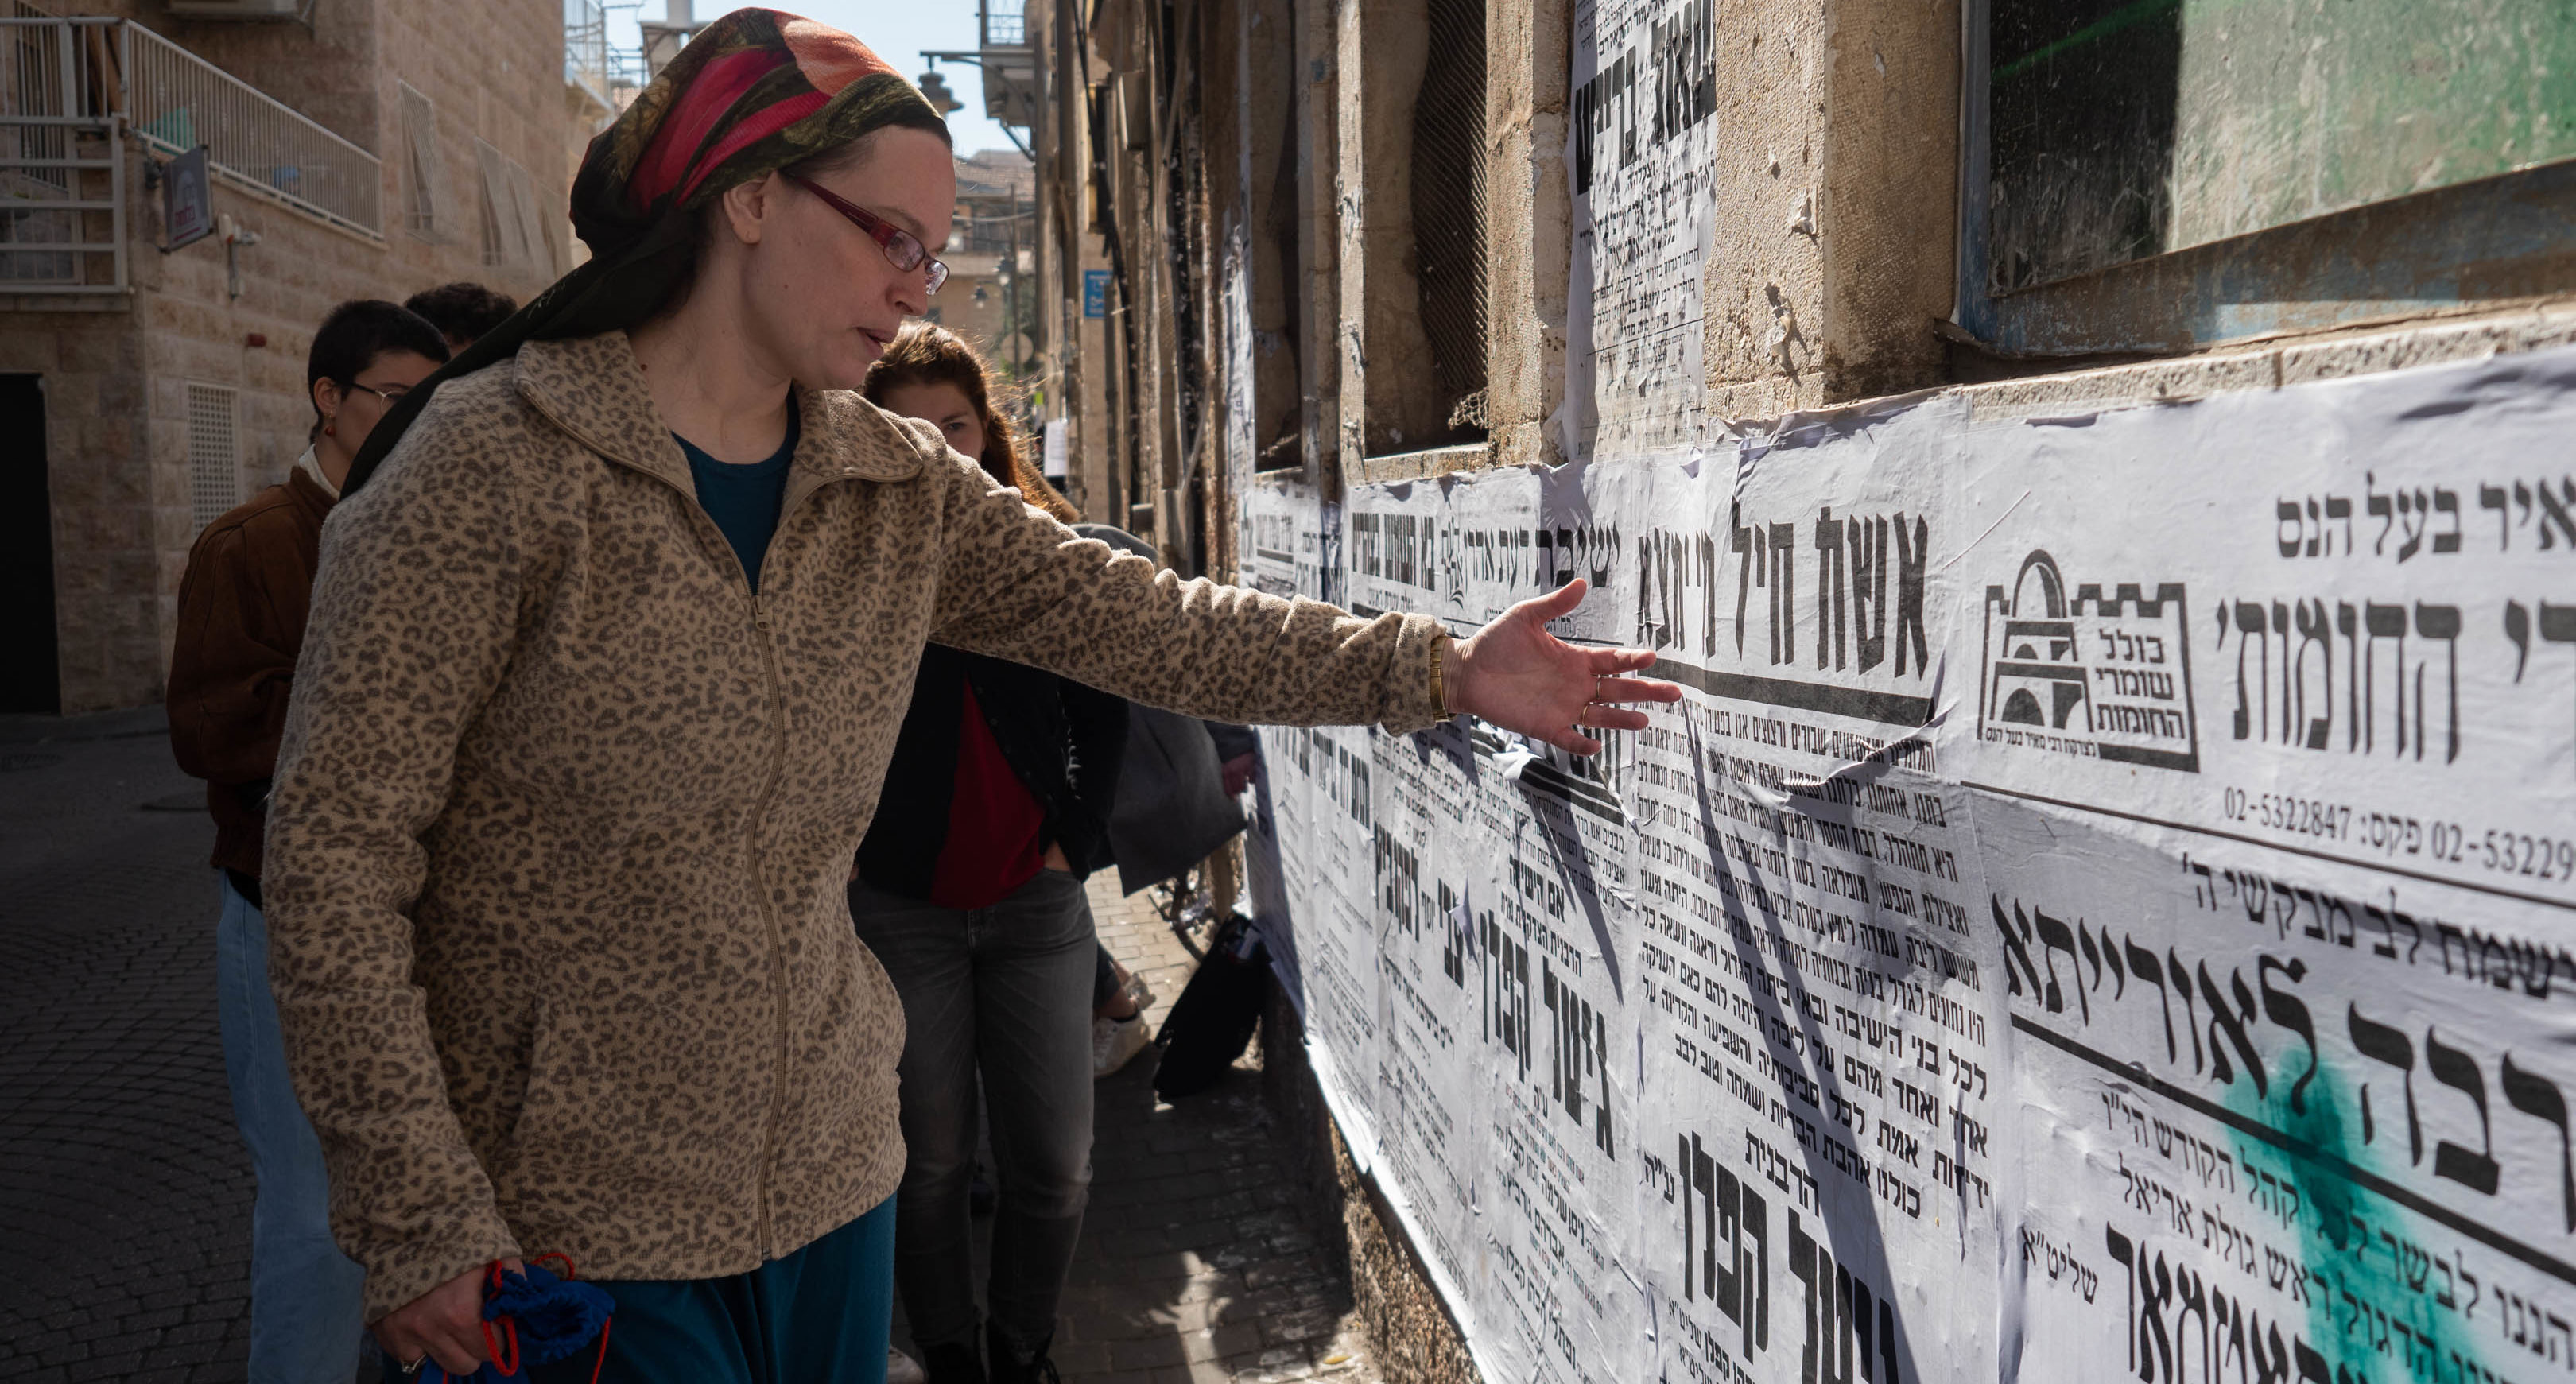 Newspapers on the walls of an ultra-orthodox quarter in Jerusalem